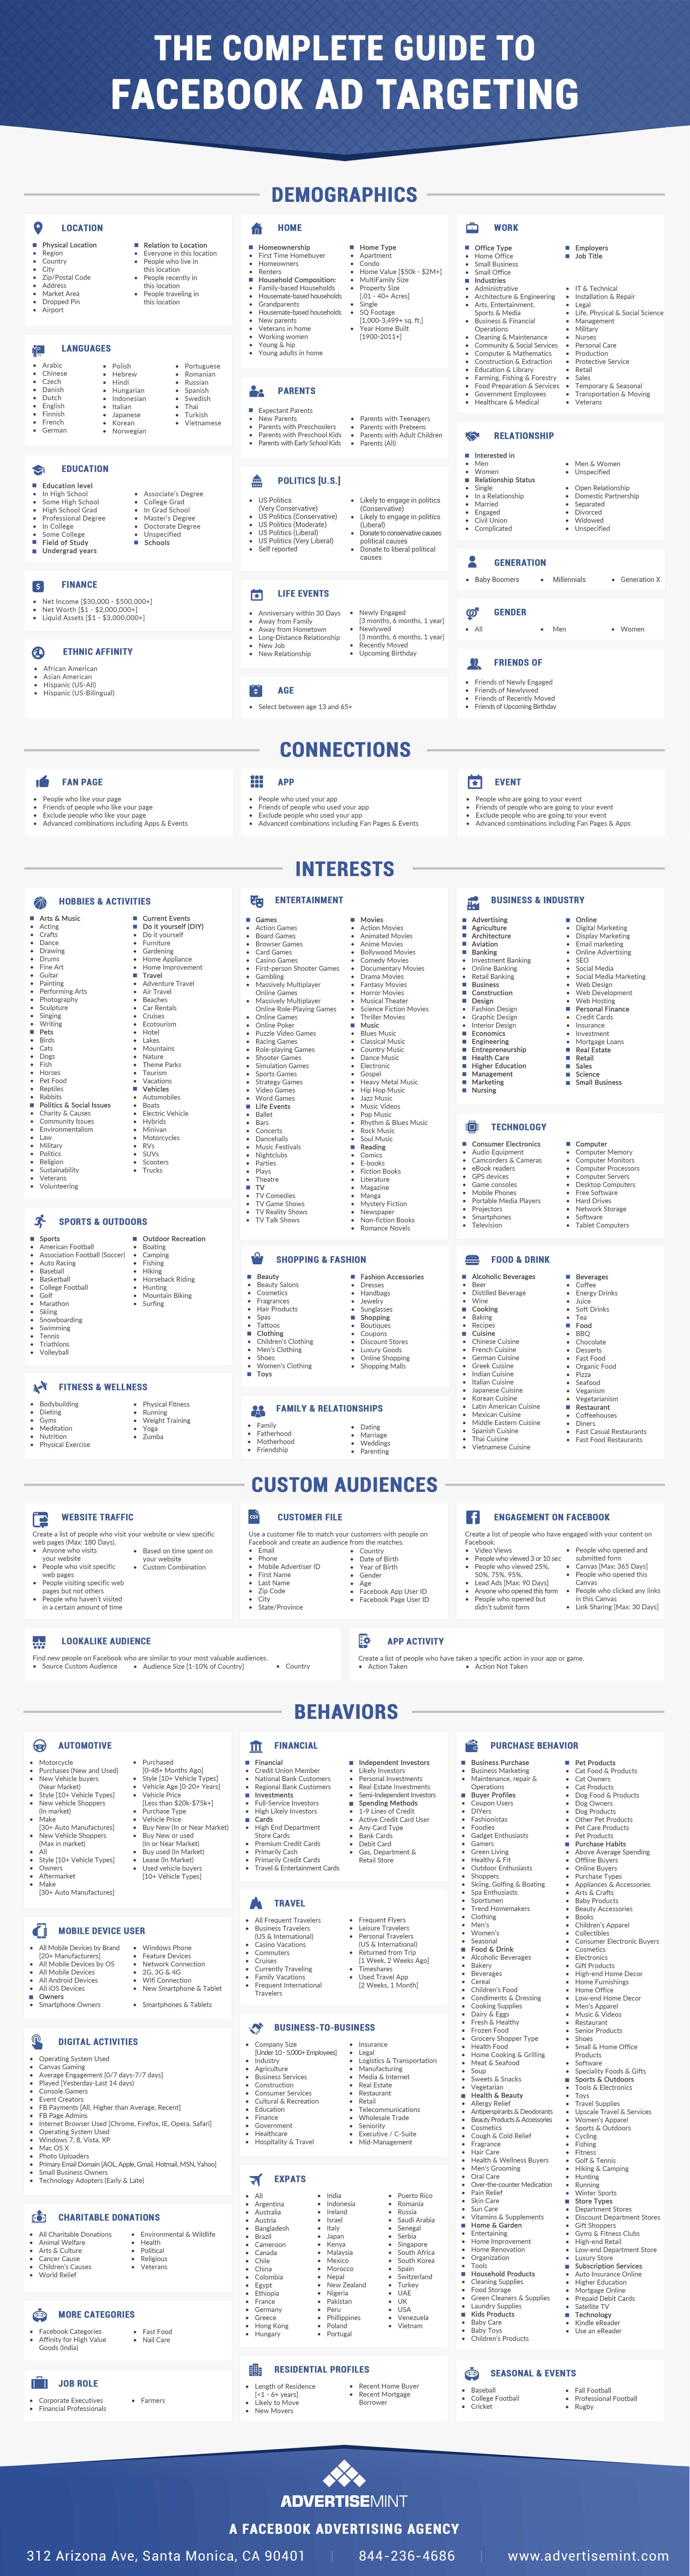 Complete Facebook Ad Targeting Guide Infographic